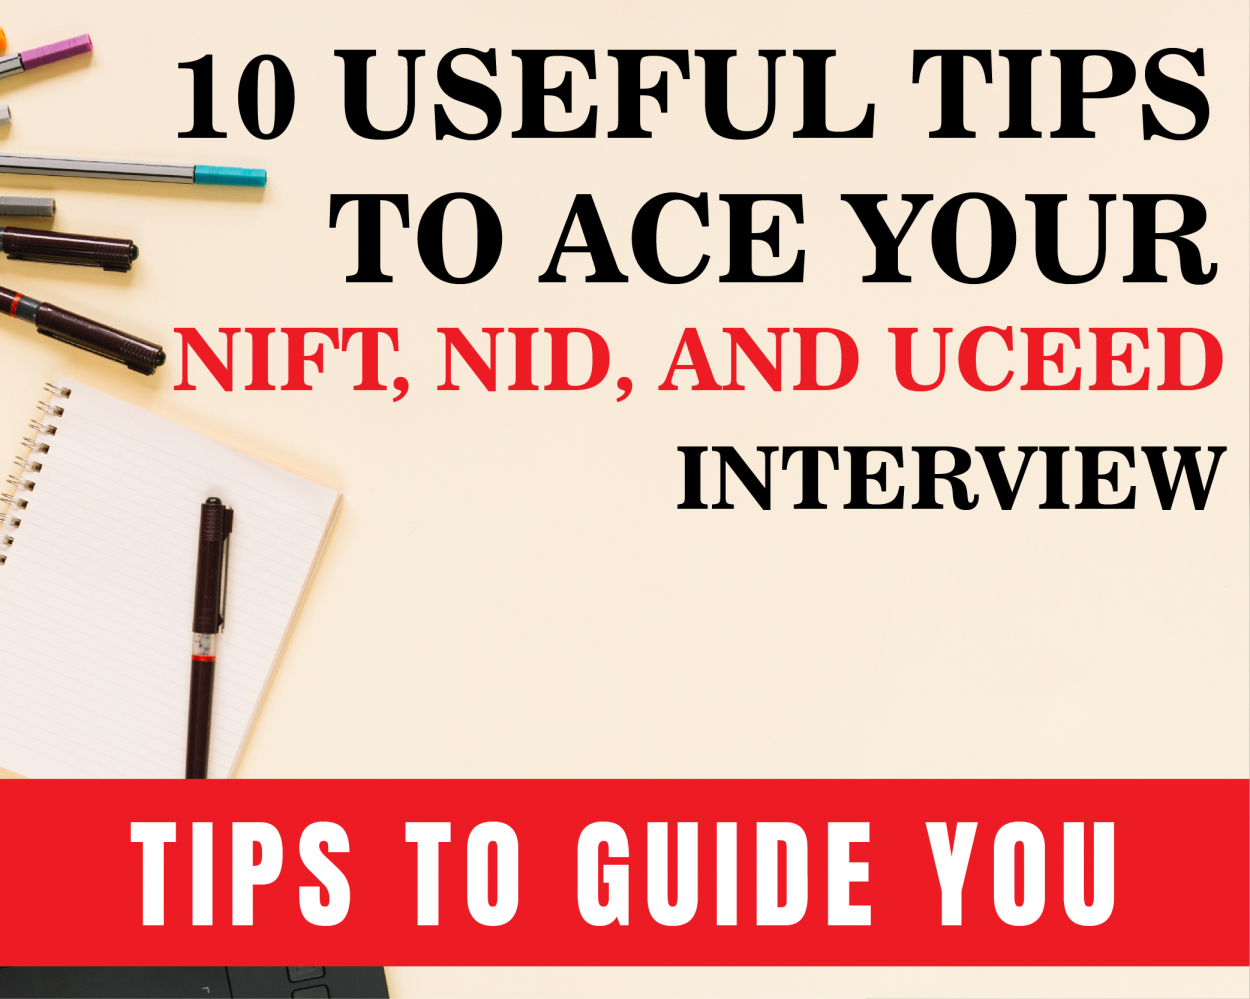 10 Useful Tips to Ace Your NIFT, NID, and UCEED Interview | Tips to Guide You